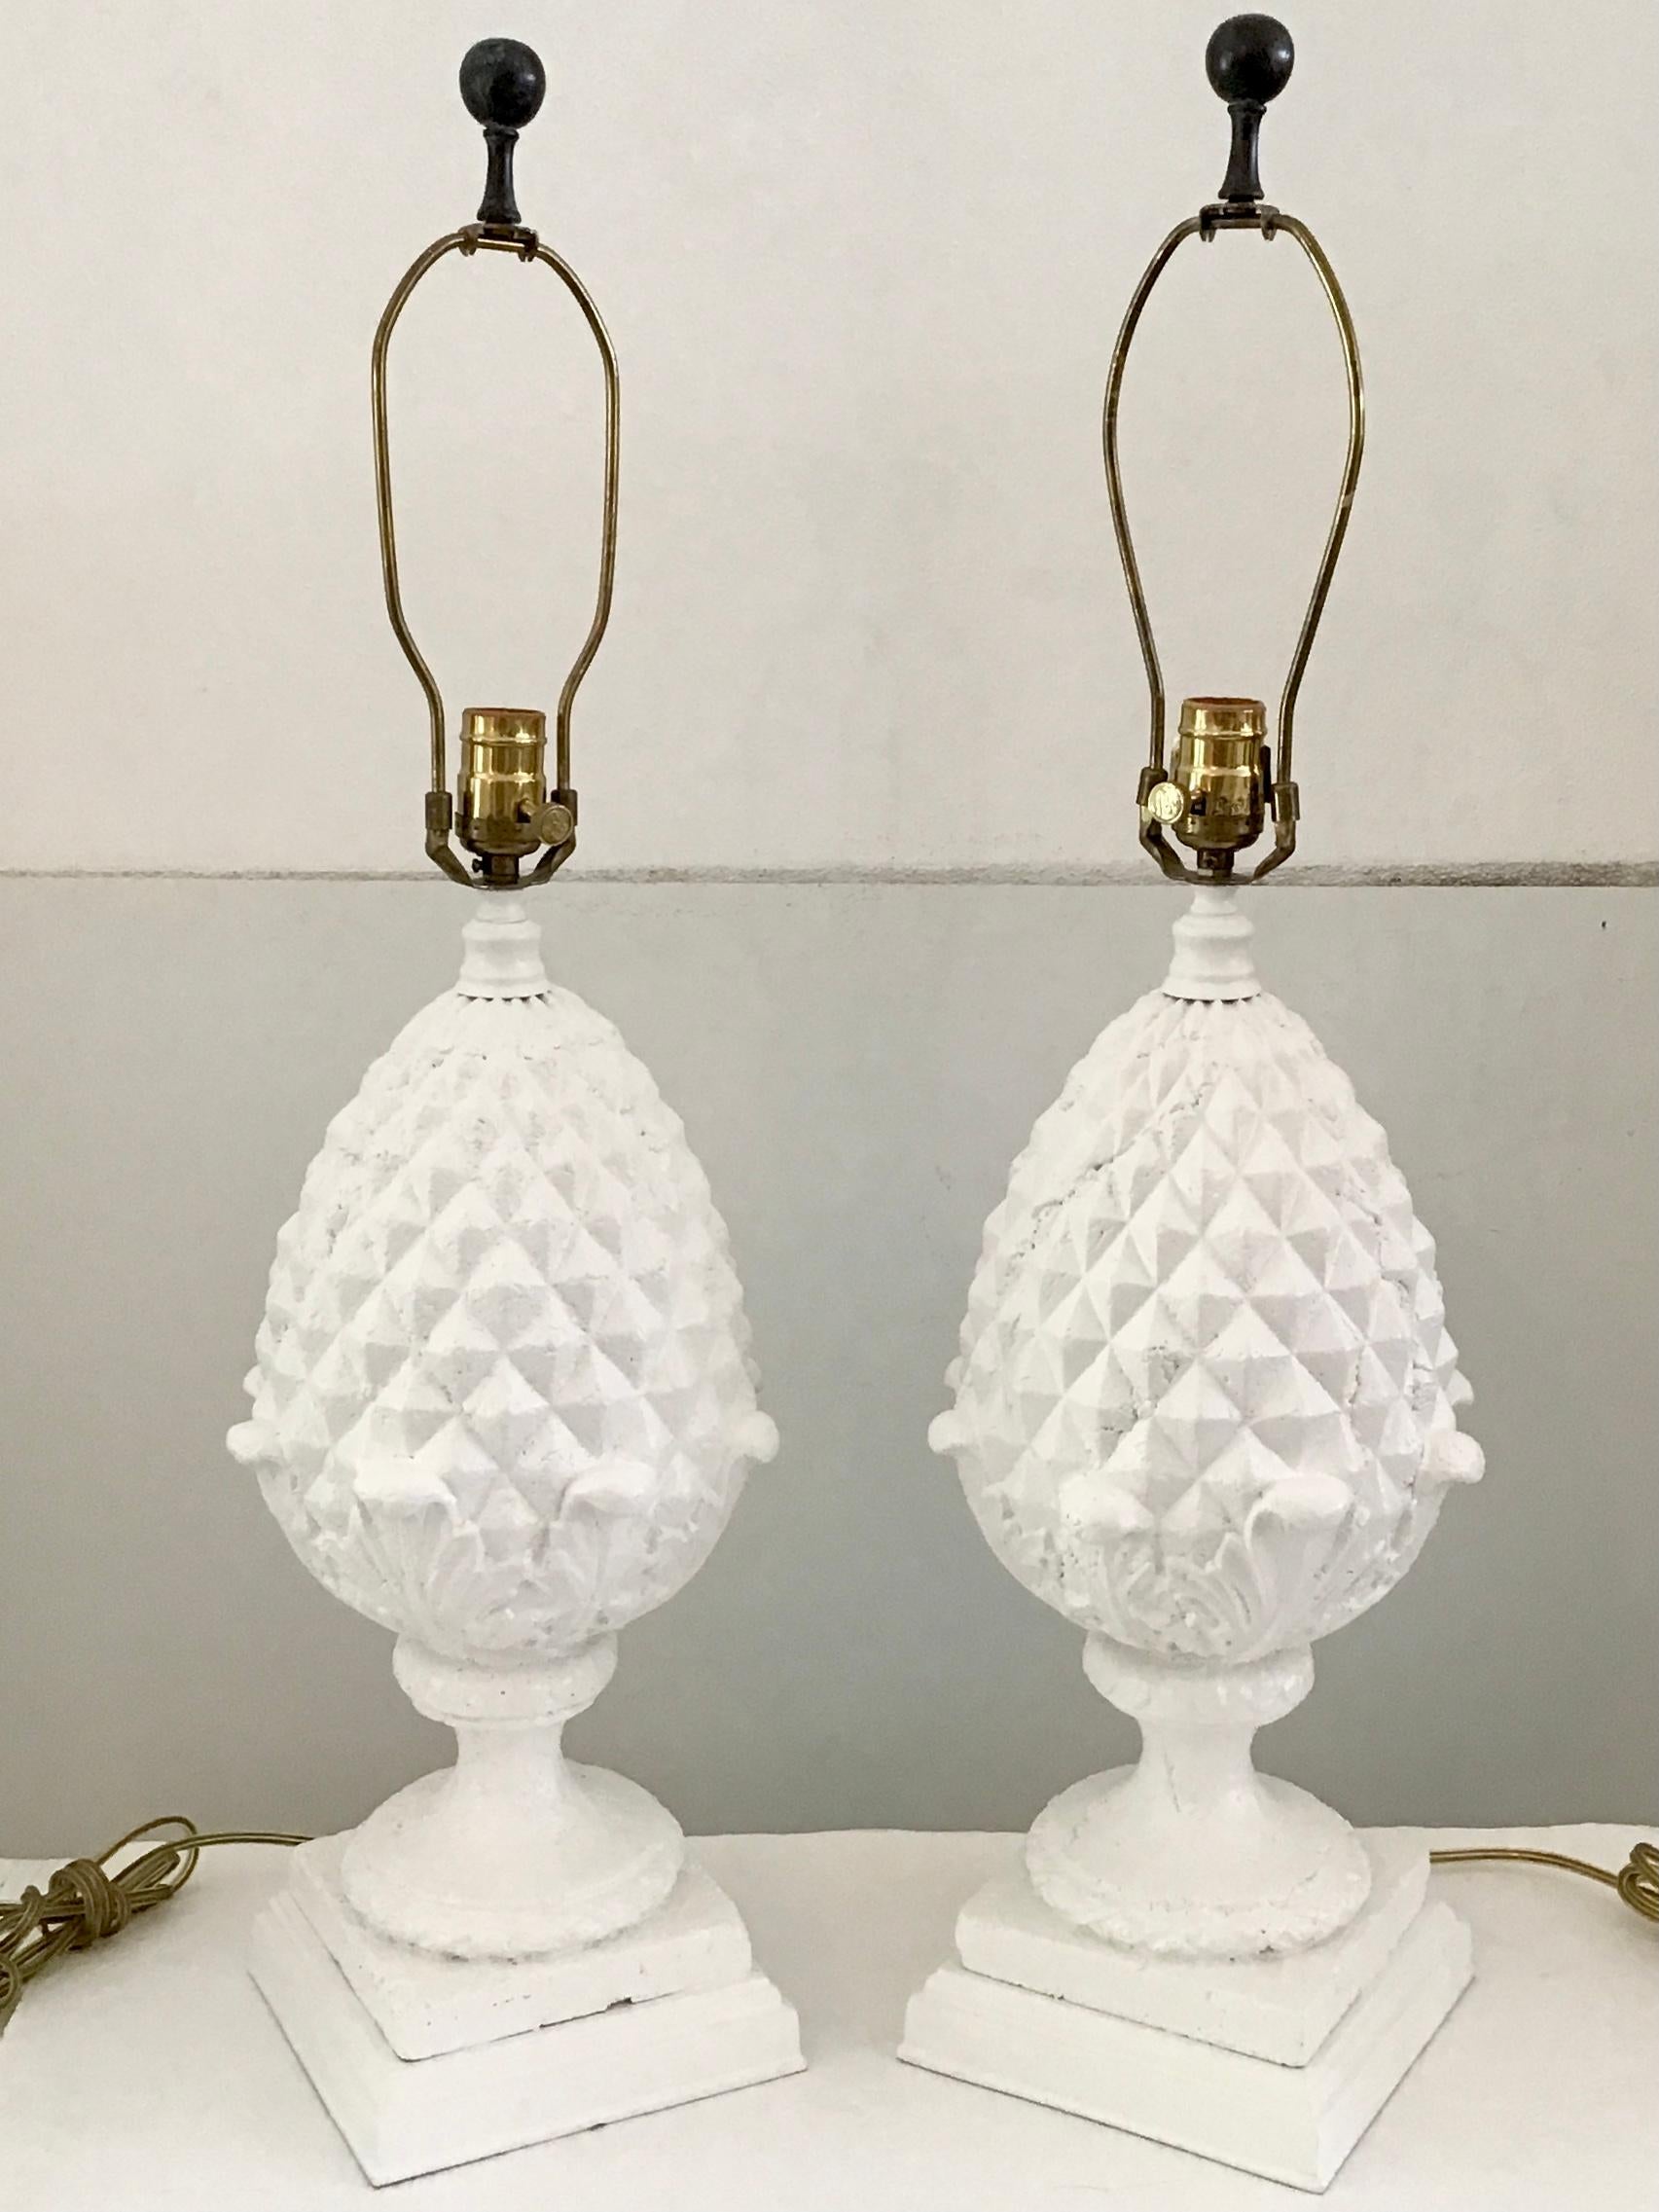 Fabulous pair of stone pineapple table lamps freshly lacquered in white. Give some character to your table tops with these fun decor lamps. Just add shades of your choice.